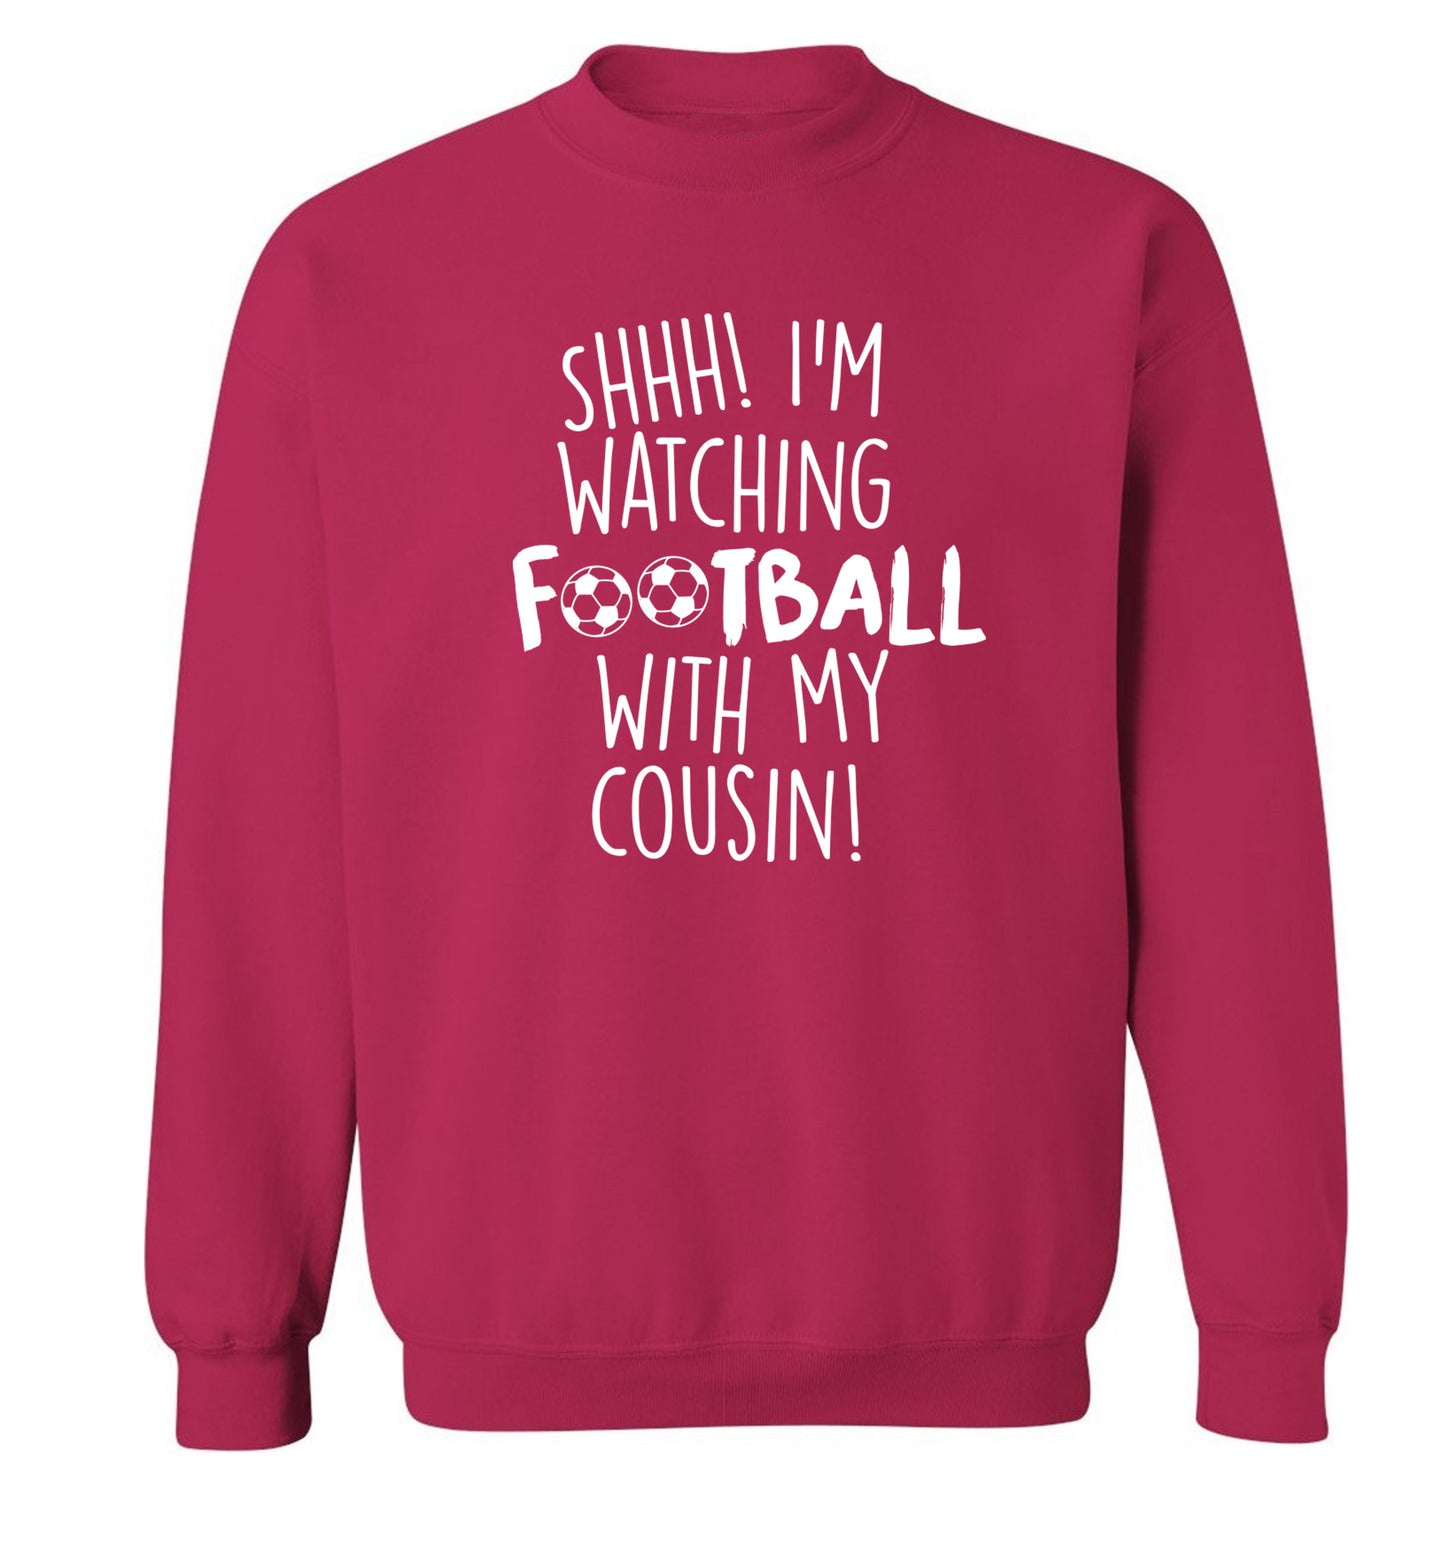 Shhh I'm watching football with my cousin Adult's unisexpink Sweater 2XL